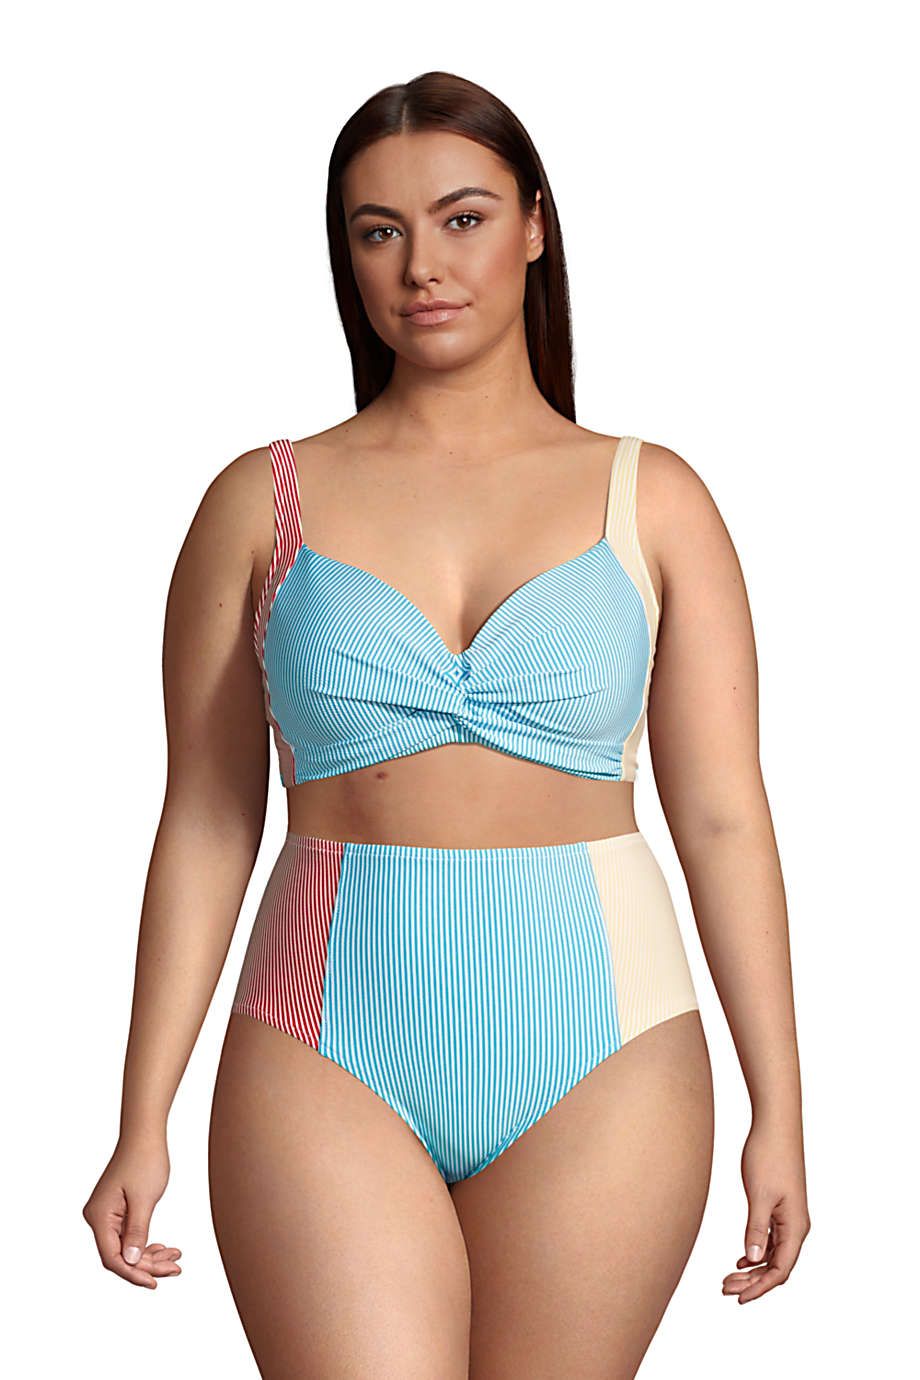 What type of swimsuits suit a flat-chested woman? - Quora